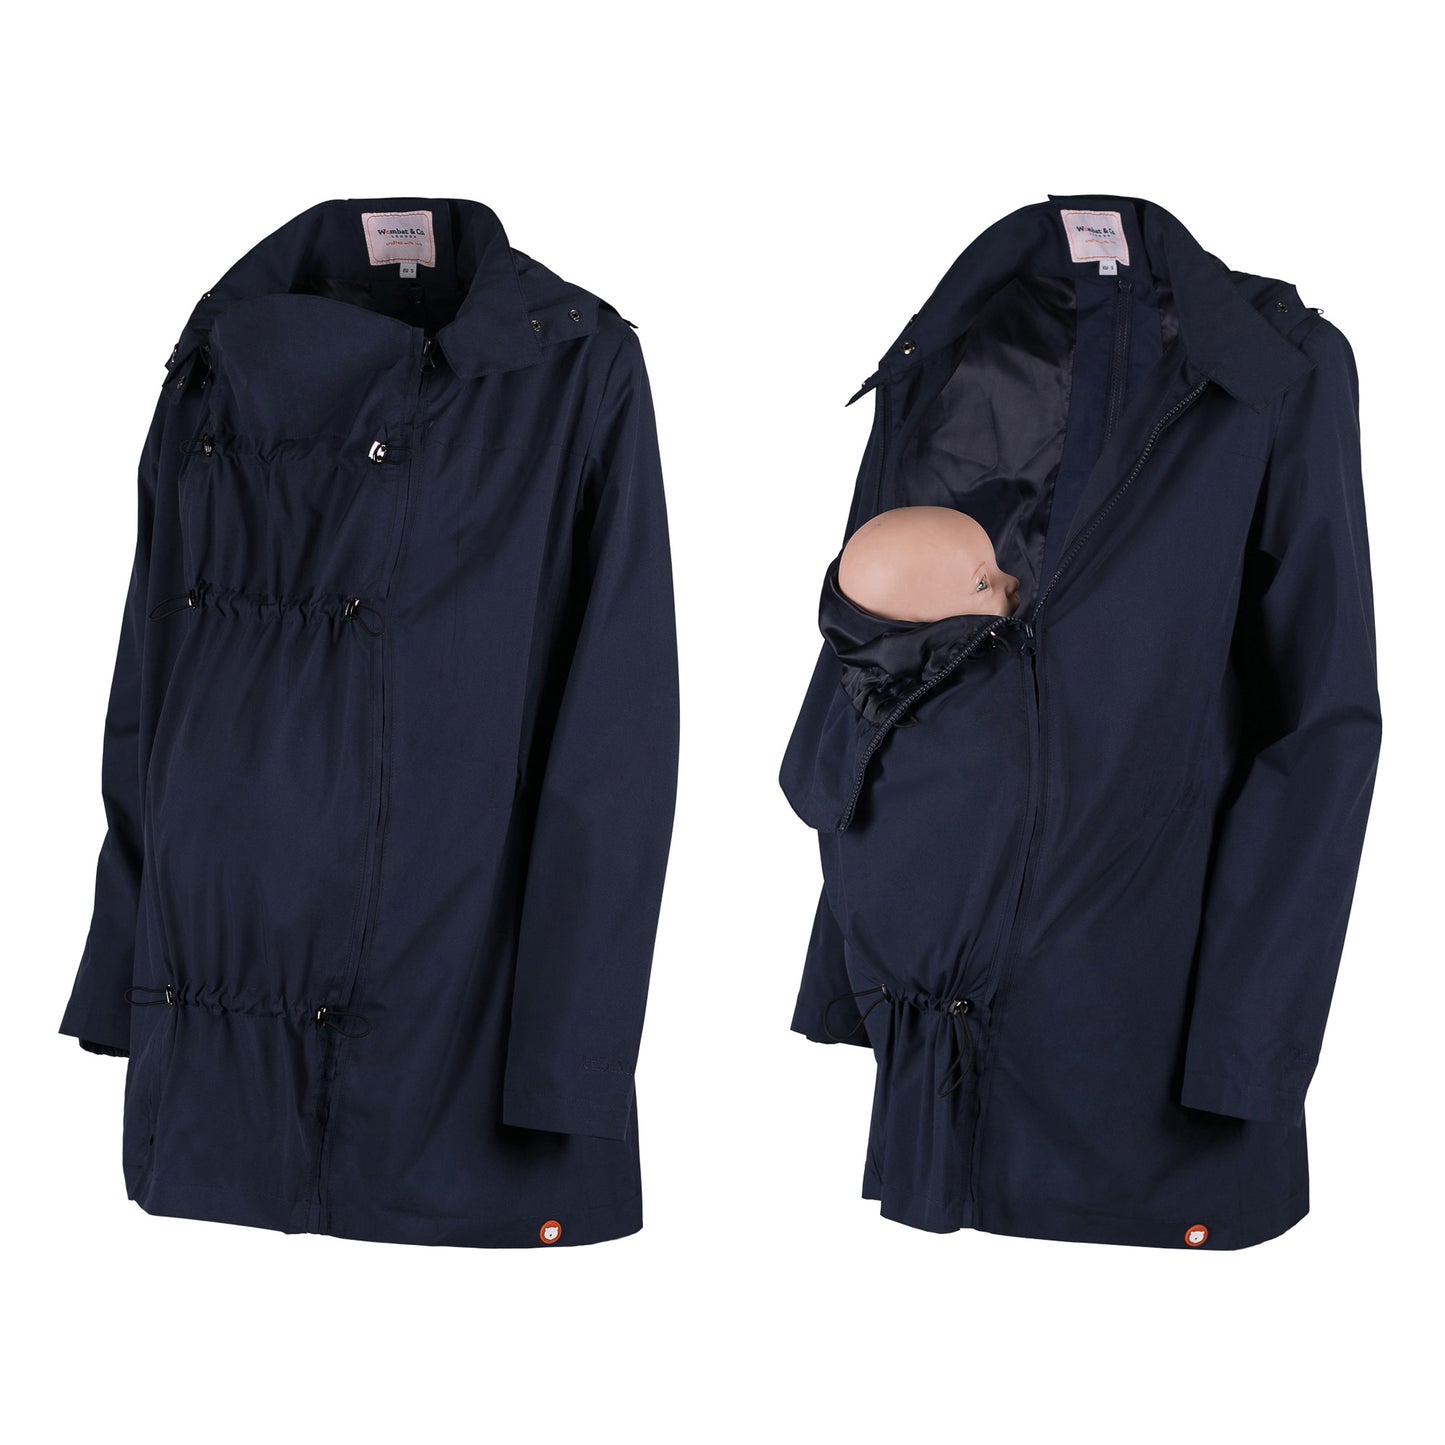 NUMBAT GO - pregnancy and baby wearing jacket - navy blue